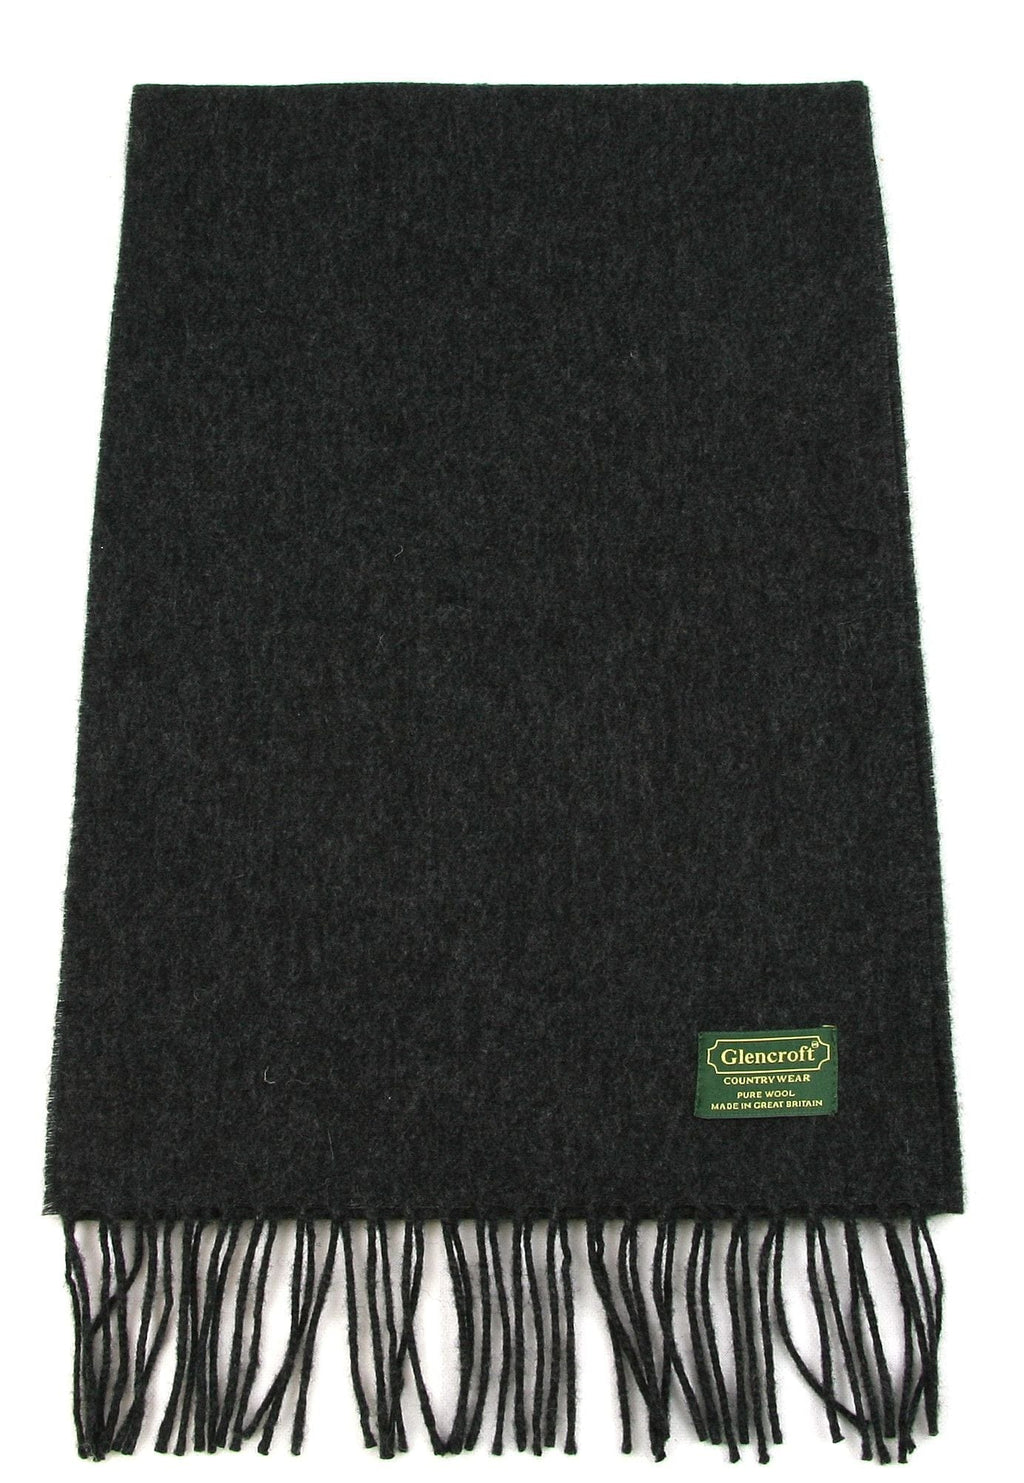 Unisex 100% Lambswool Scarves Charcoal Scarves by Glencroft | Poe and ...